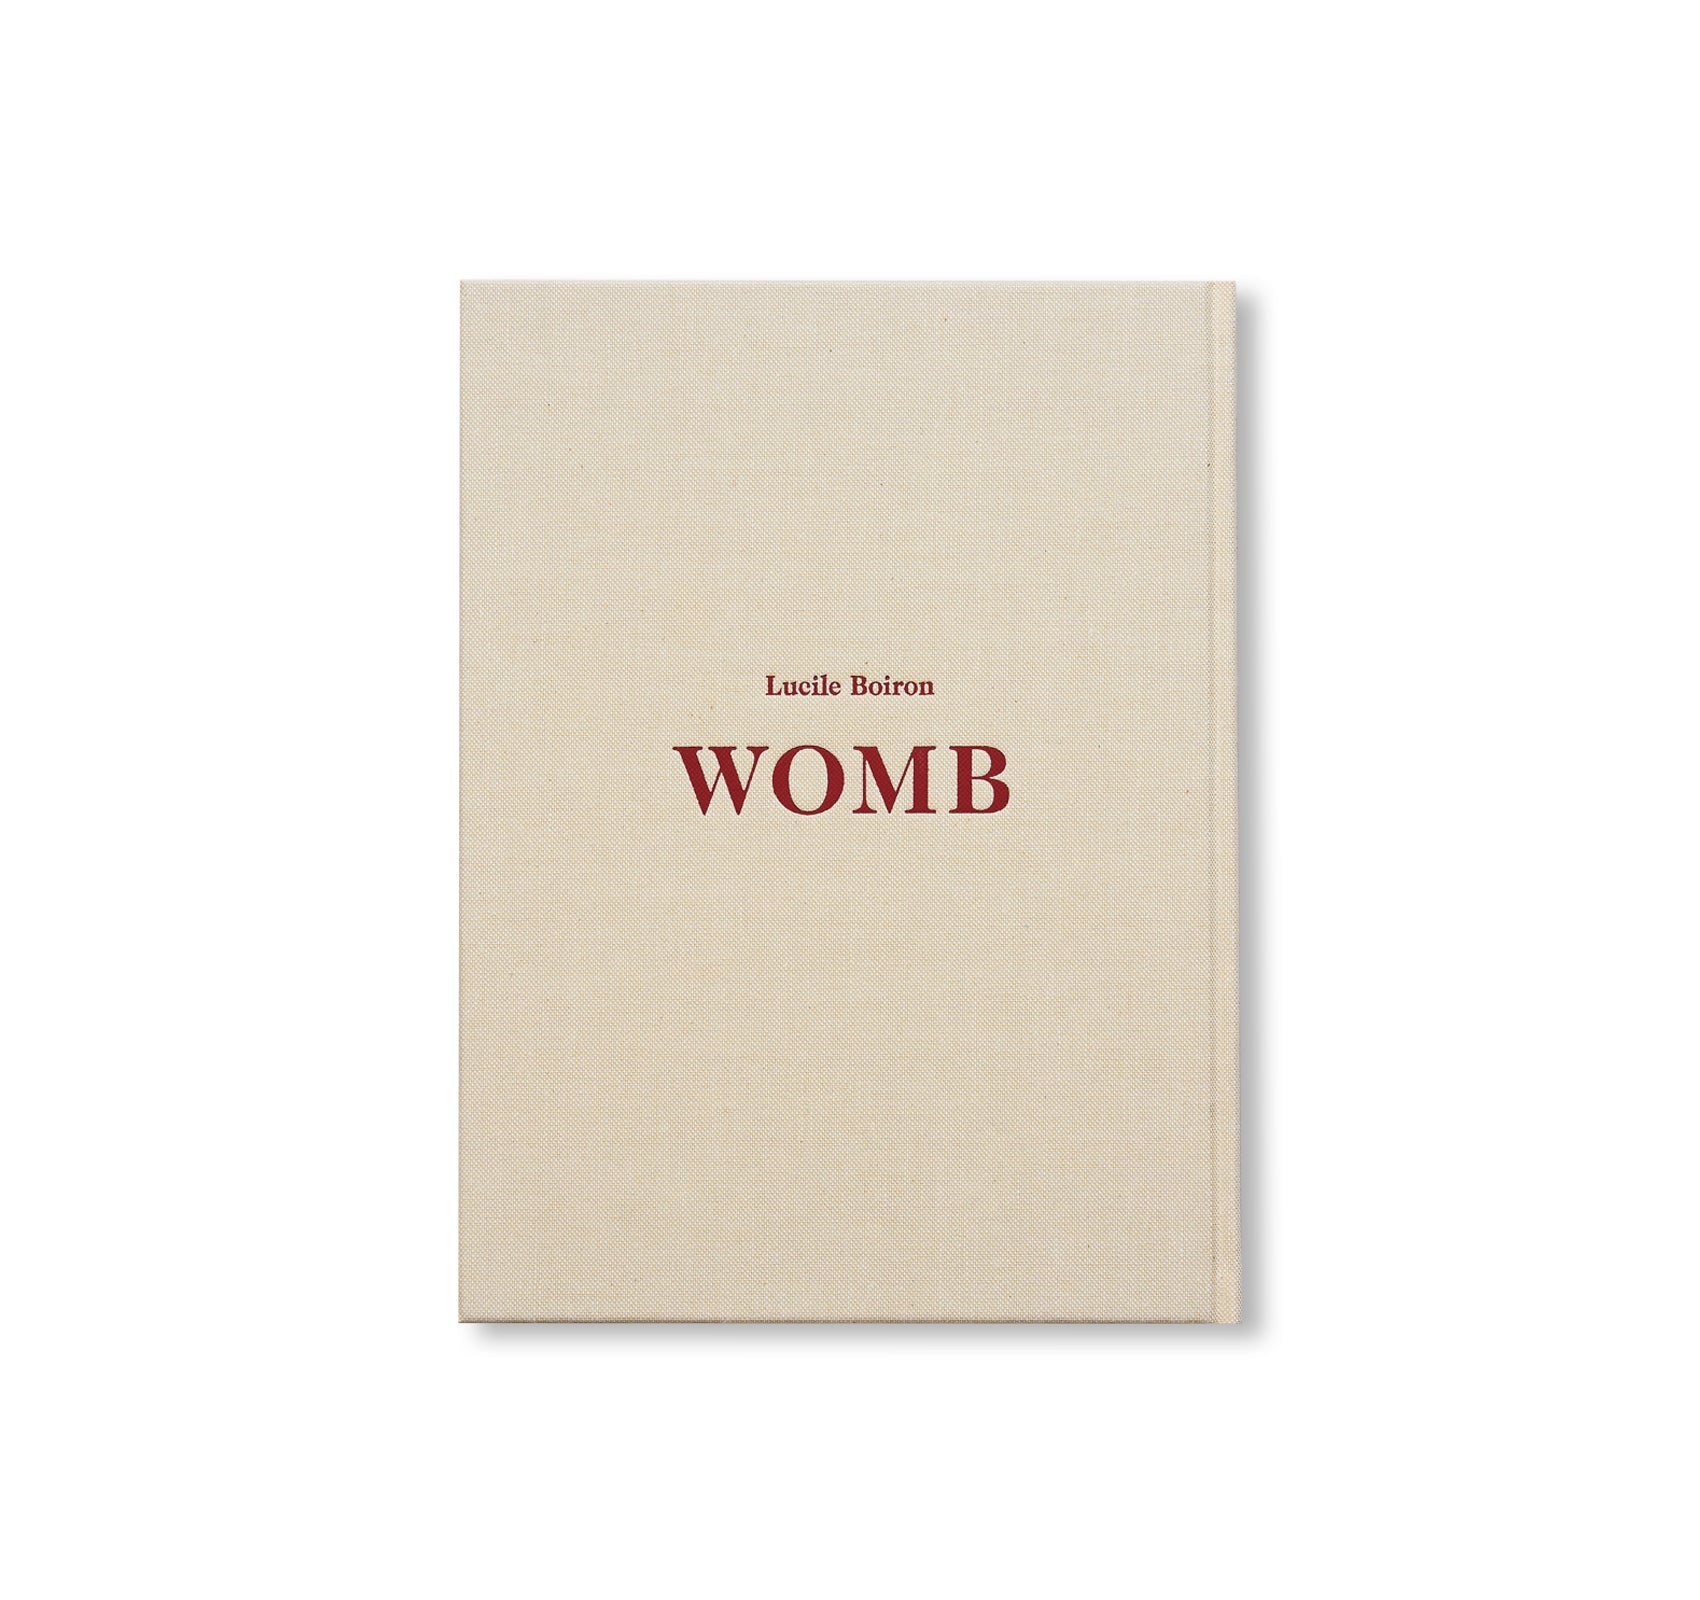 WOMB by Lucile Boiron